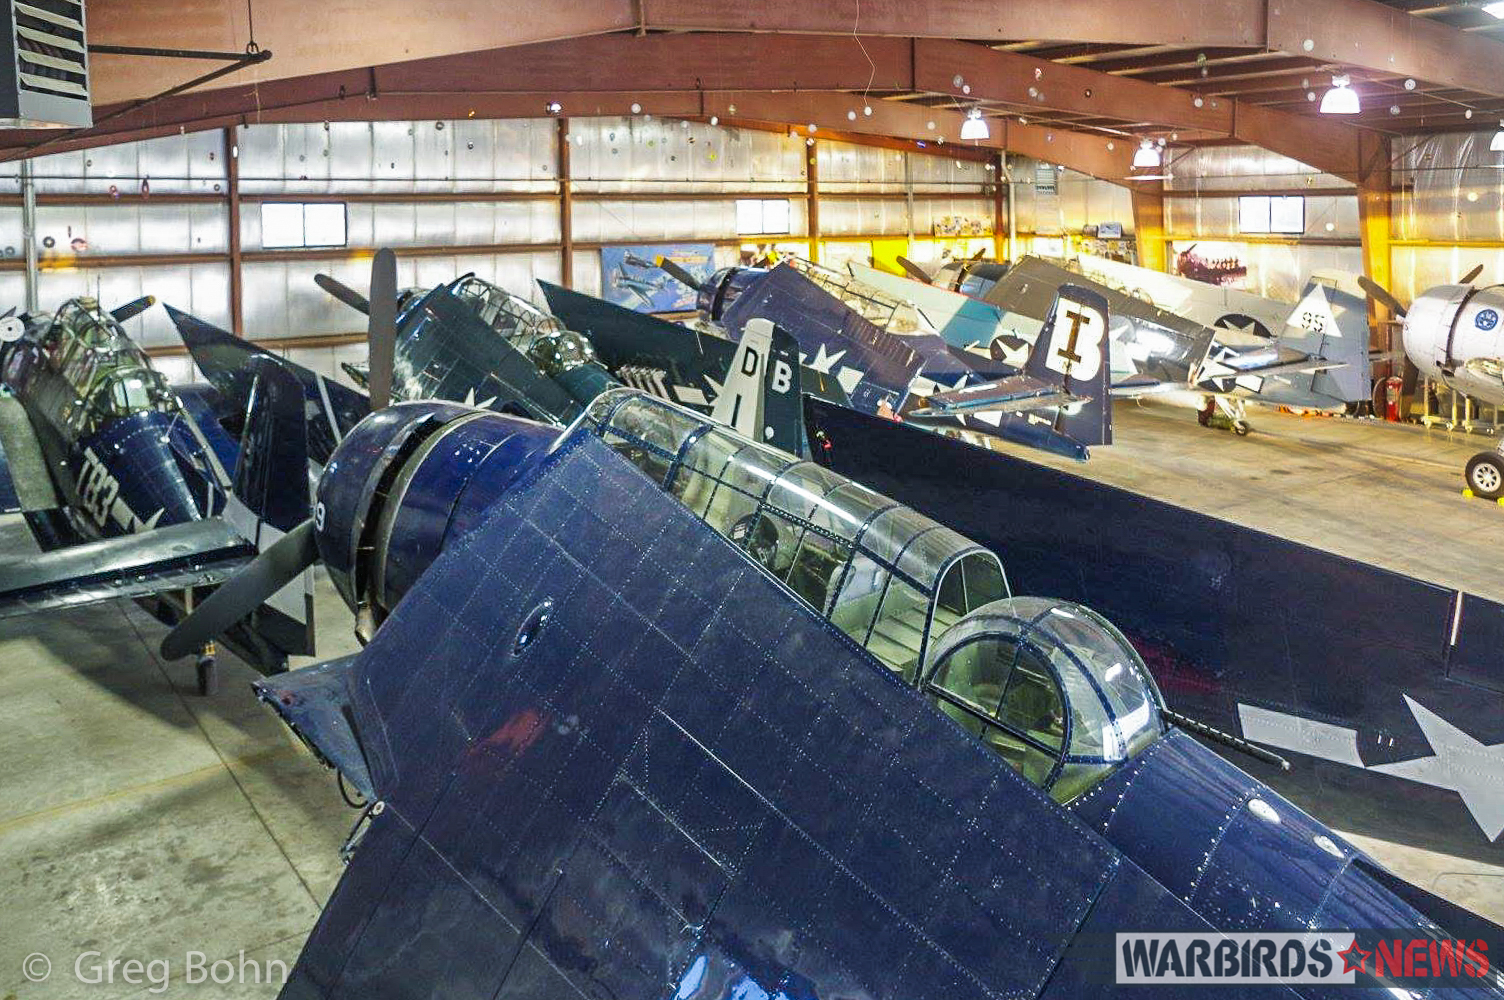 Six of the seven TBM's to attend the 2017 Gathering protected from the stormy weather, aircraft carrier storage deck style, within the City of Peru's hangar. (Photo by Greg Bohn)